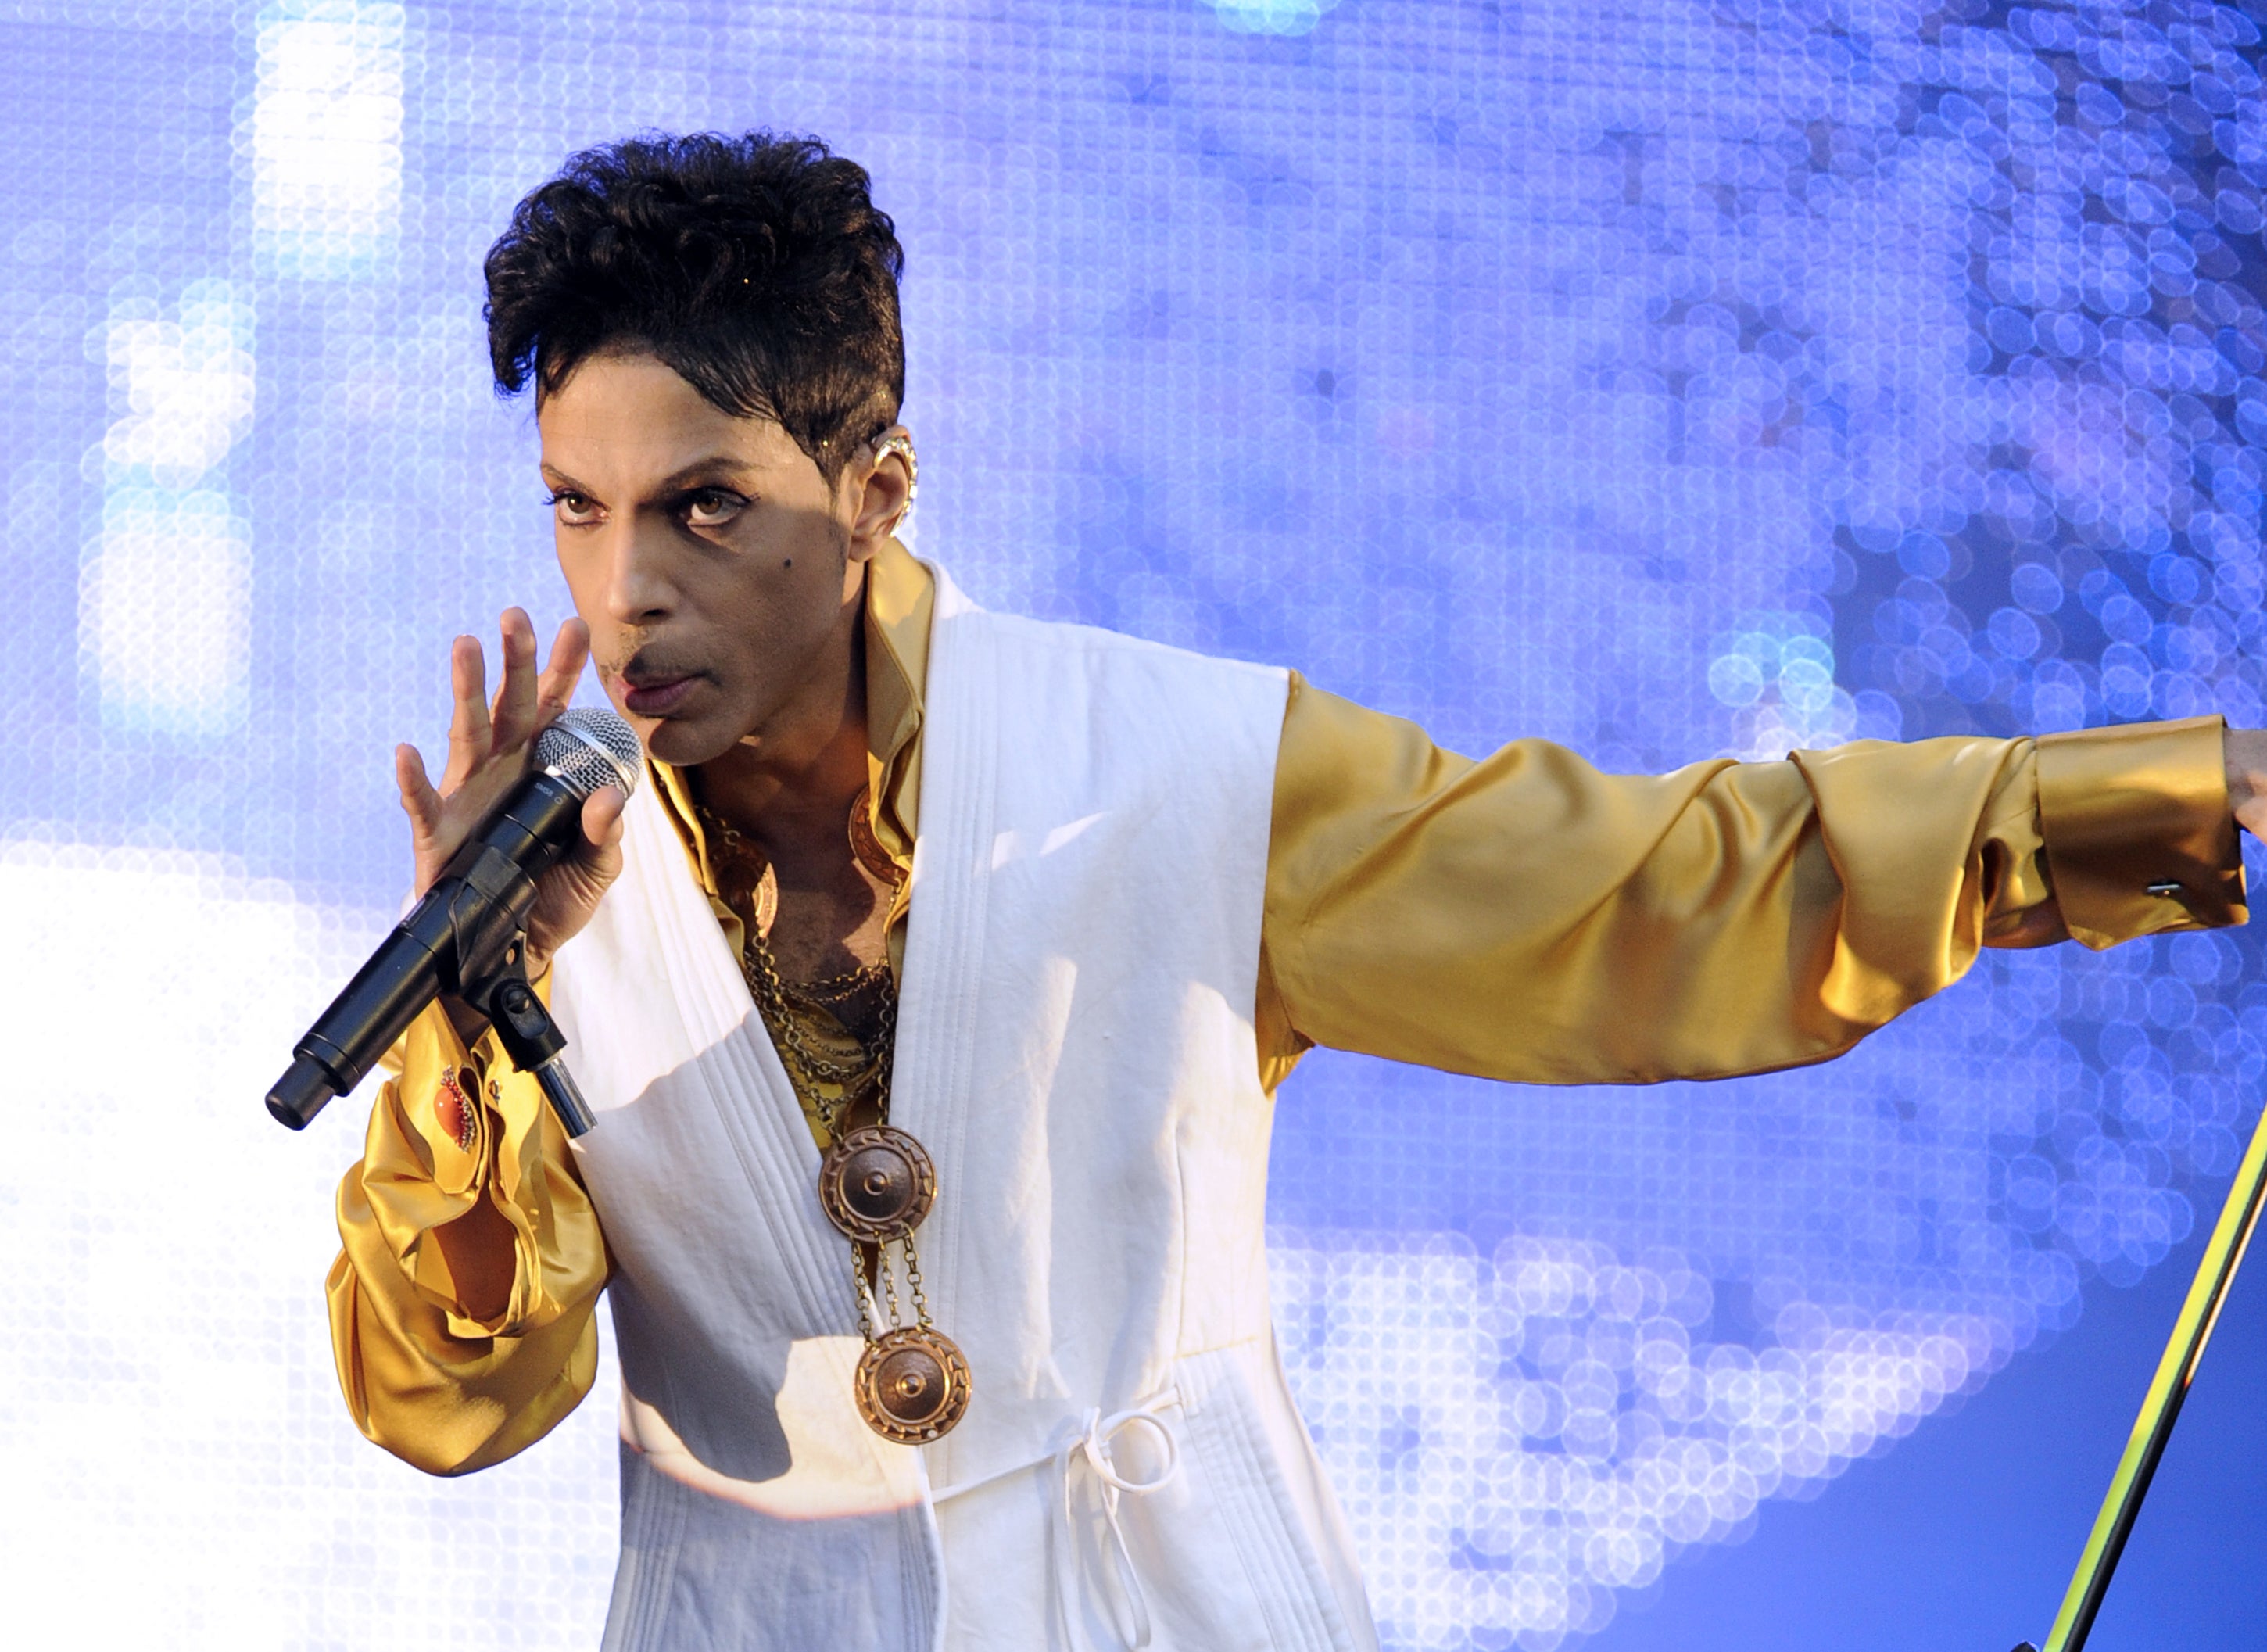 Prince performs on stage at the Stade de France in Paris in 2011